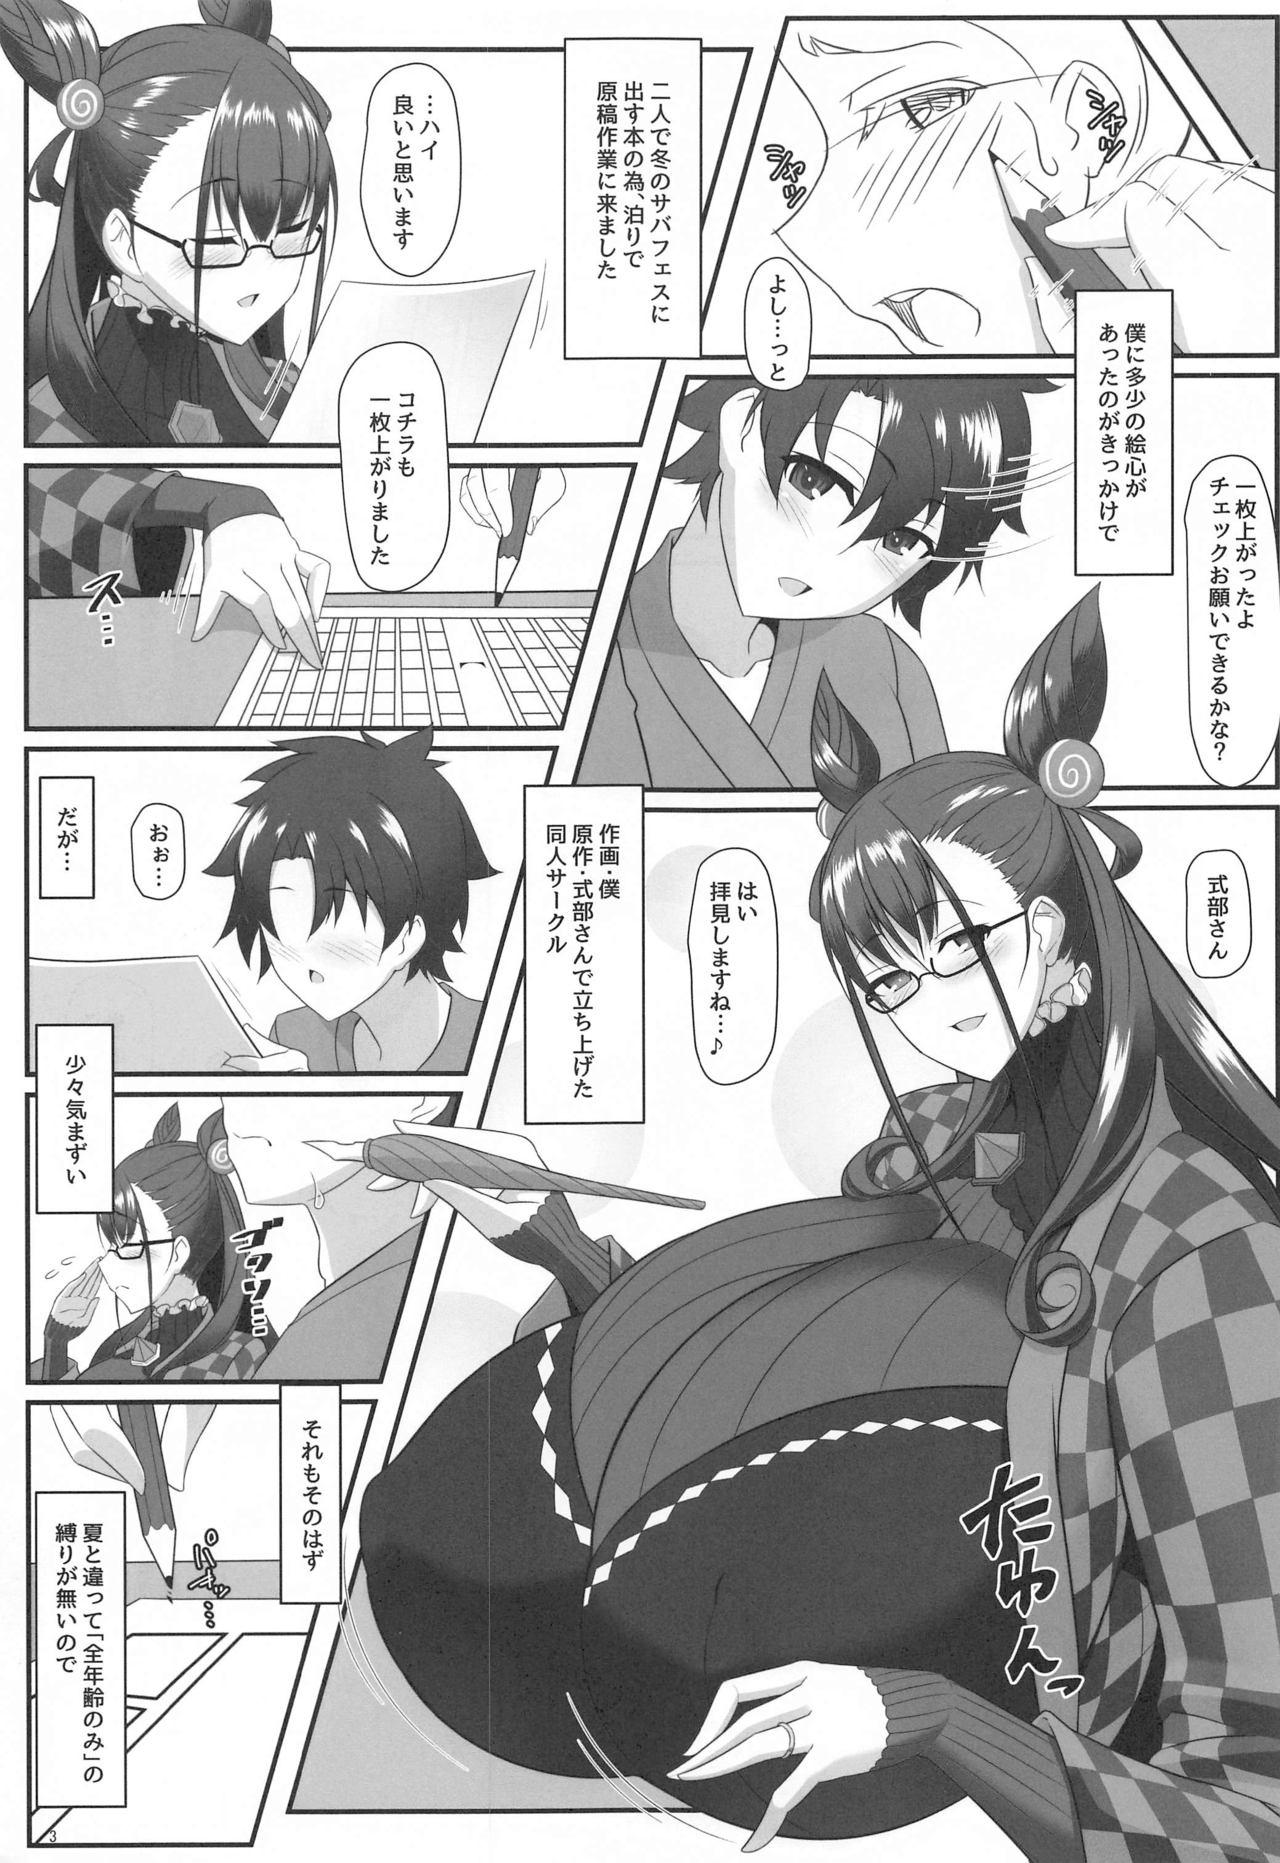 Moan shishotohitomiau - Fate grand order Swing - Picture 2